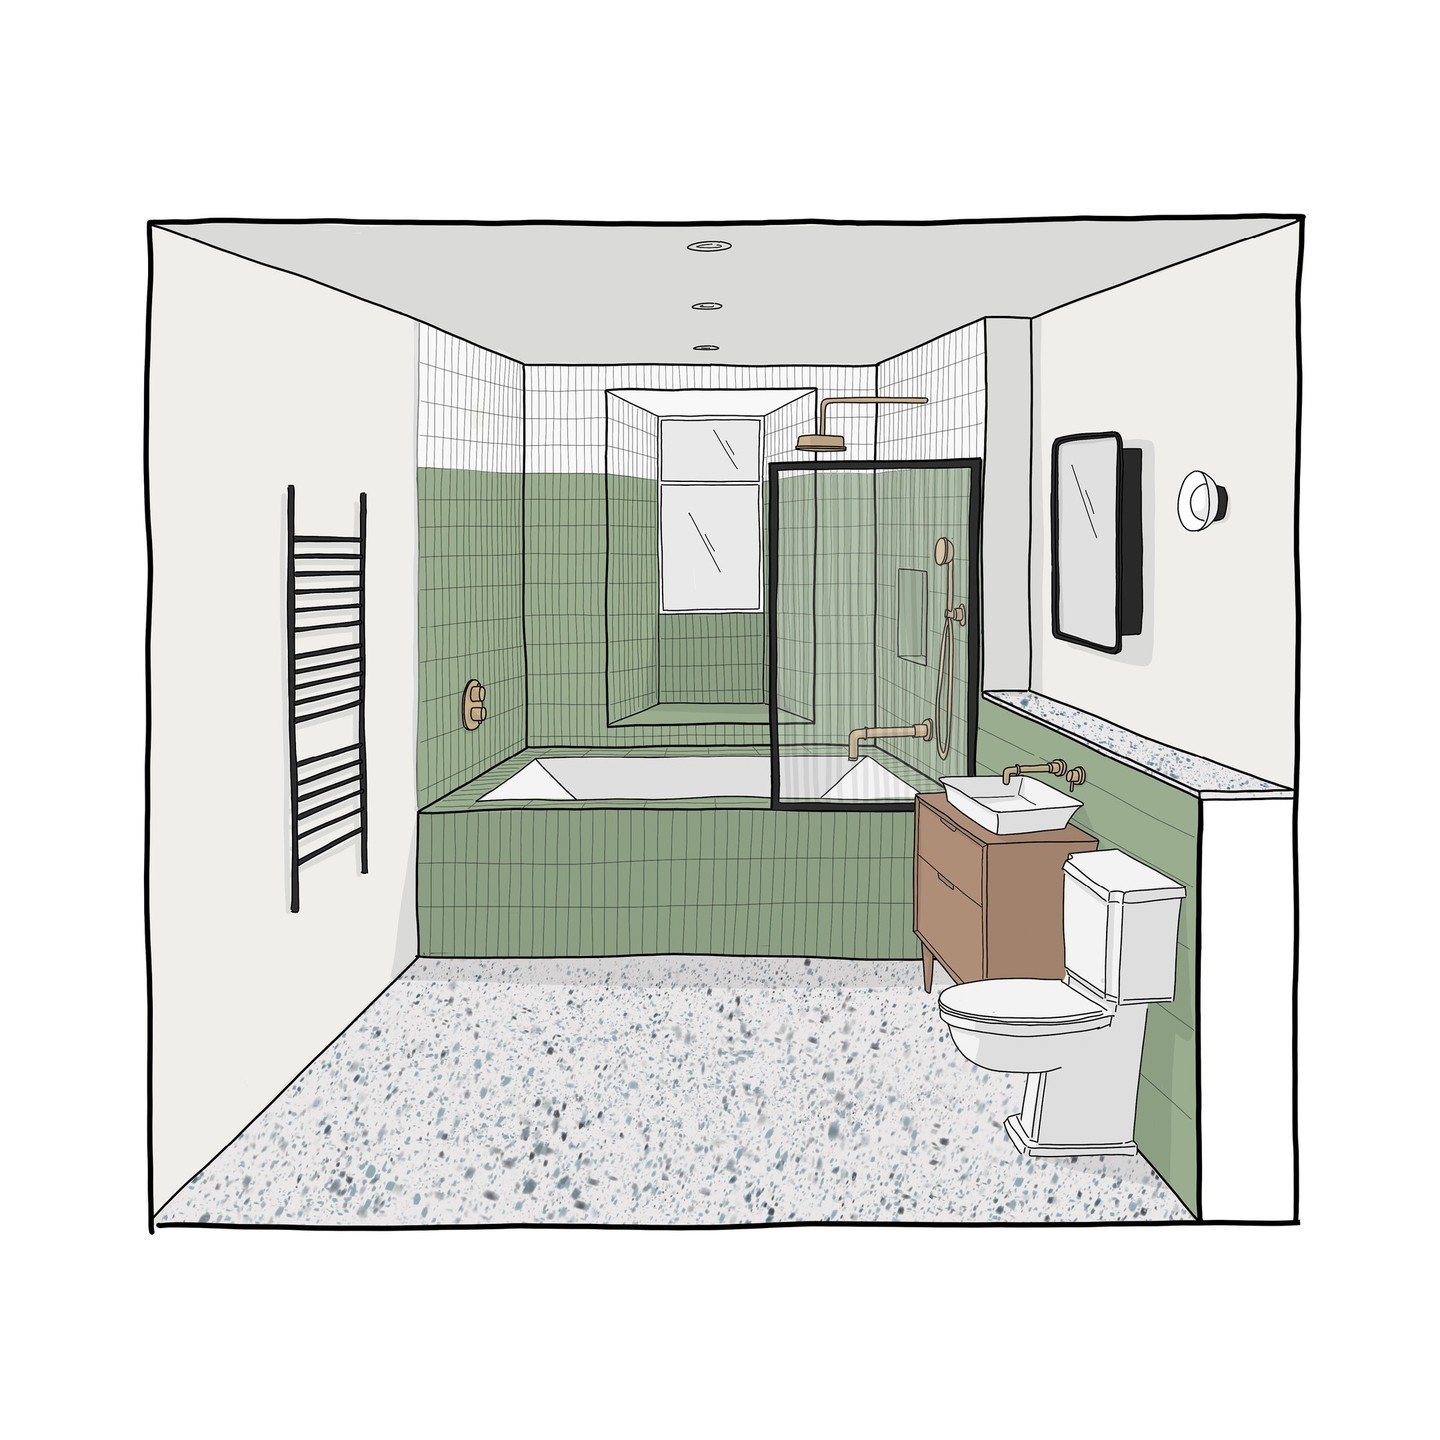 PROJECT SPOTLIGHT - The One with the Bathrooms

Client: @S7Property | Illustration Use: Marketing

I created these eye catching drawings for two bathrooms at a newly renovated residential scheme in London. The renovation has now been completed and it